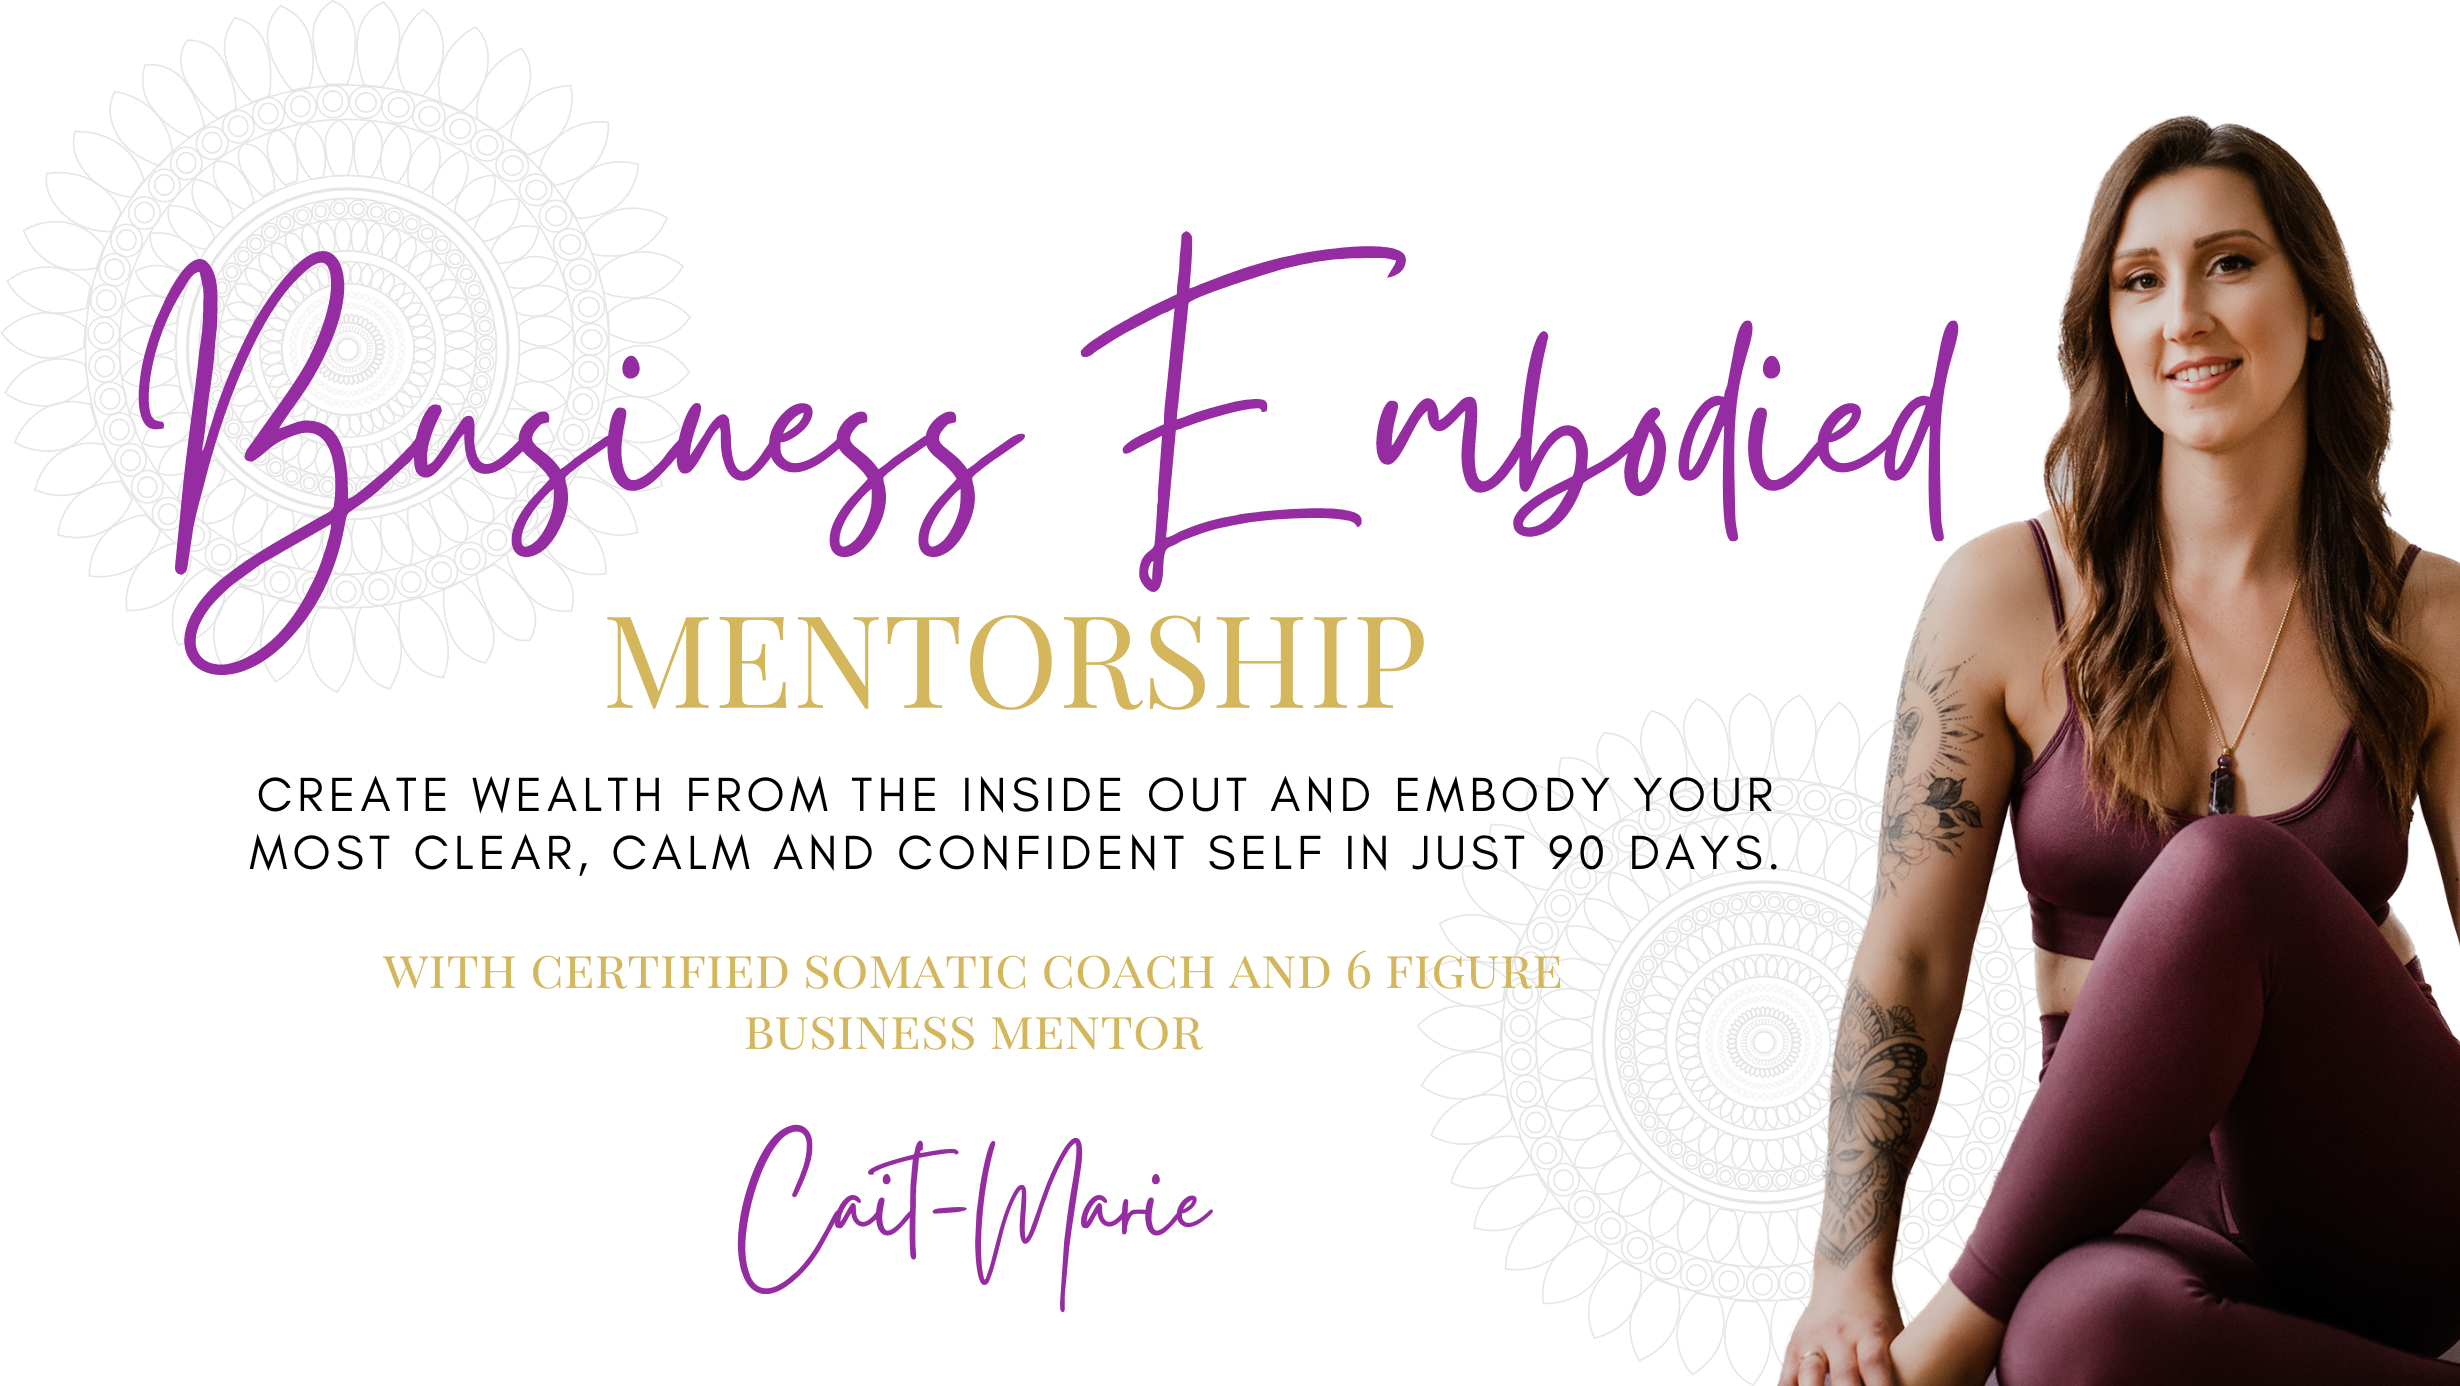 A High Touch 1 - 1 Holistic Business Mentorship Program which Uses A Whole Body Approach To Create Success and Fulfillment (3)